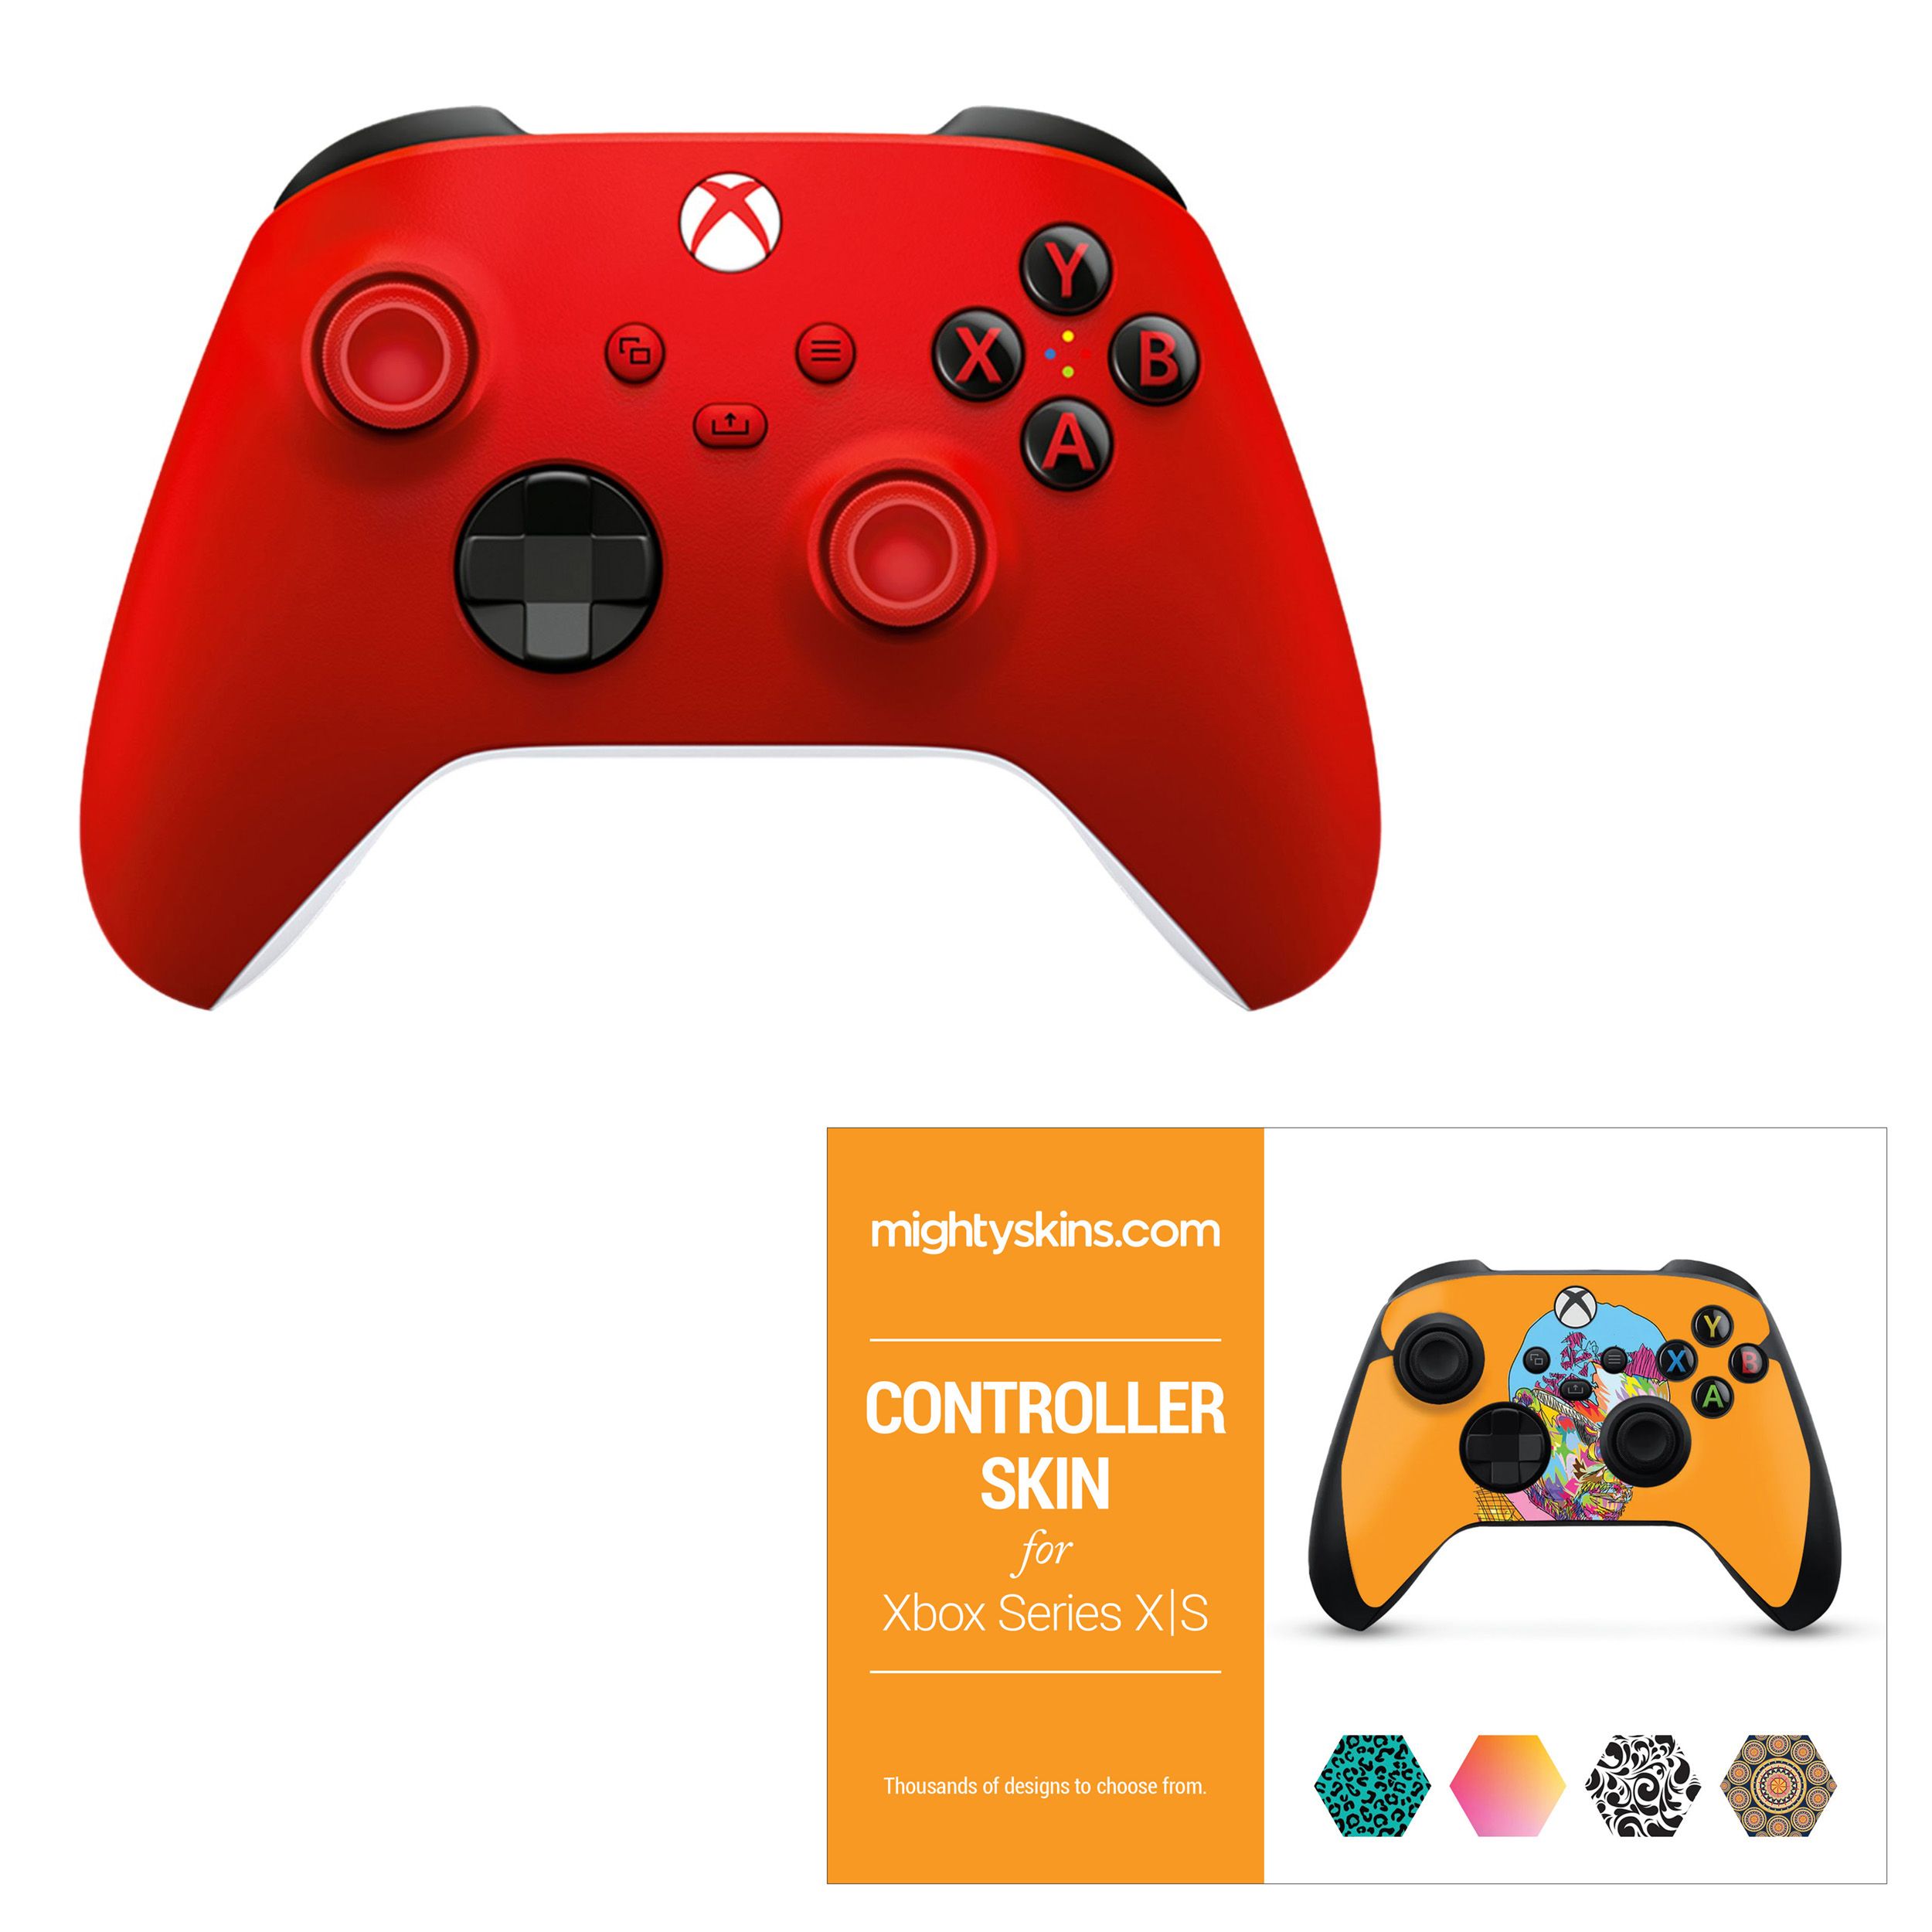 Microsoft Xbox Series X/S Controller in Red with Skins Voucher